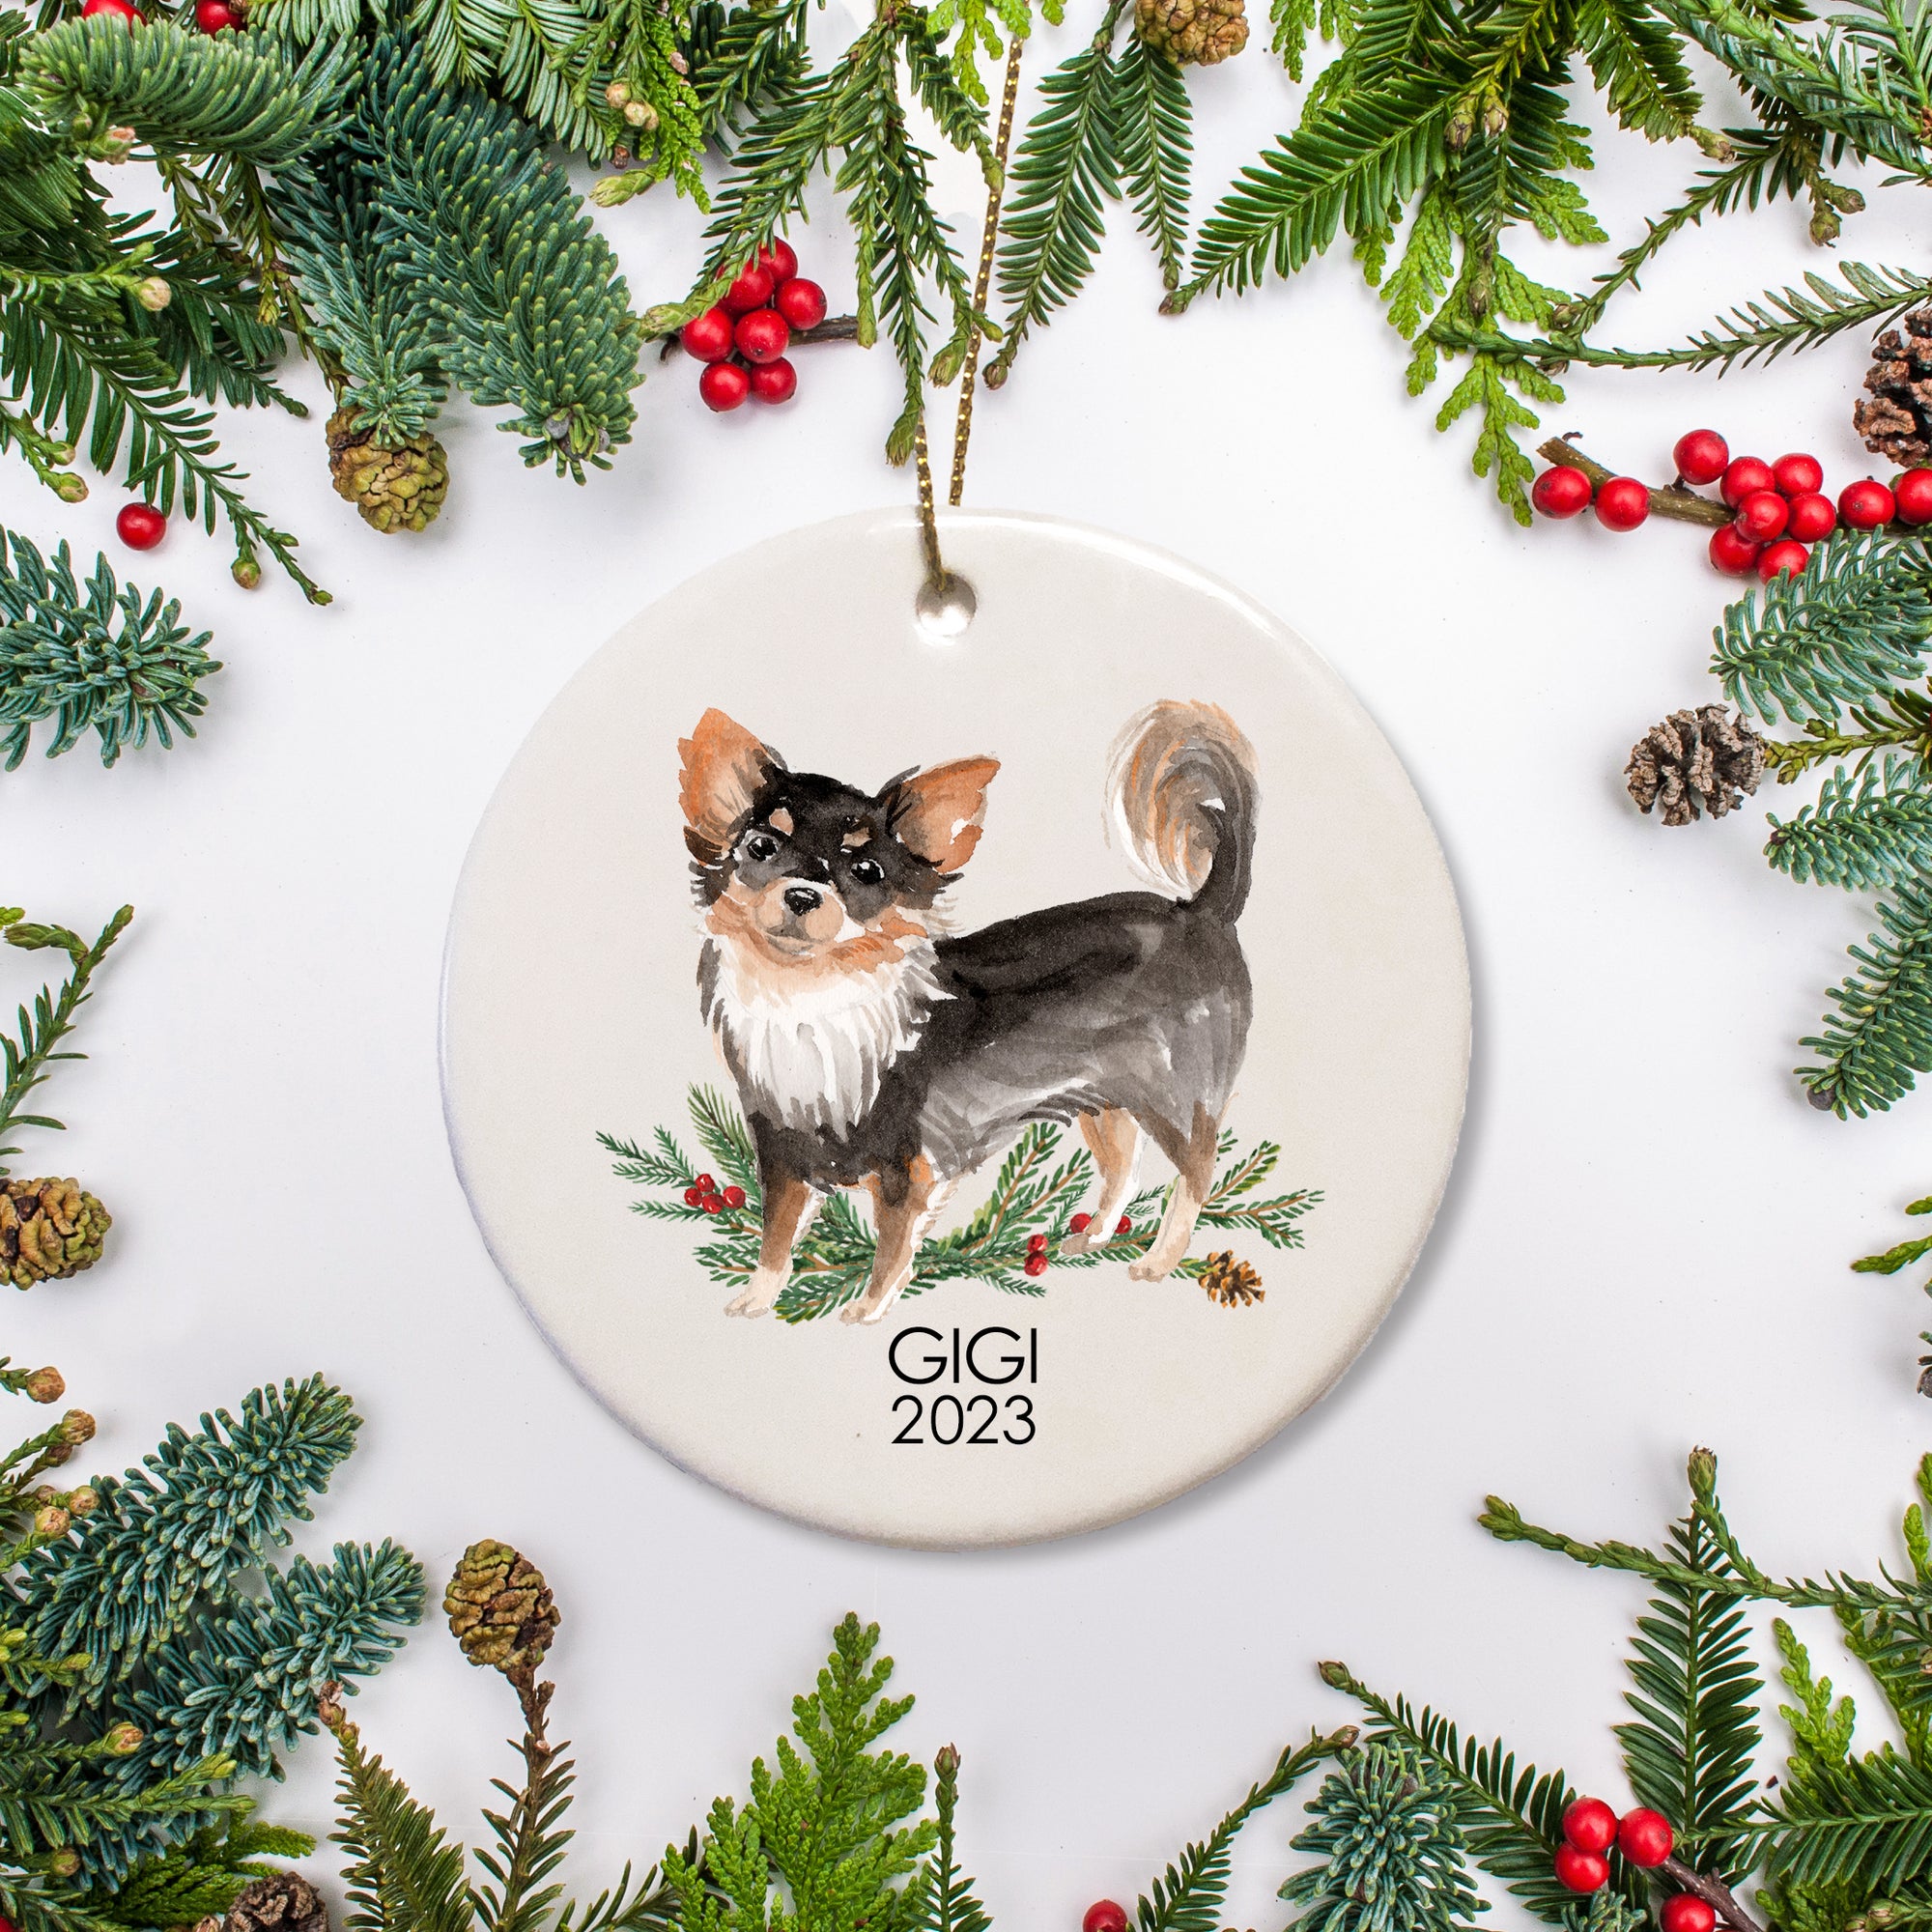 Chihuahua Christmas ornament with a long haired toy breed on a bed of holly, personalized with your dog's name